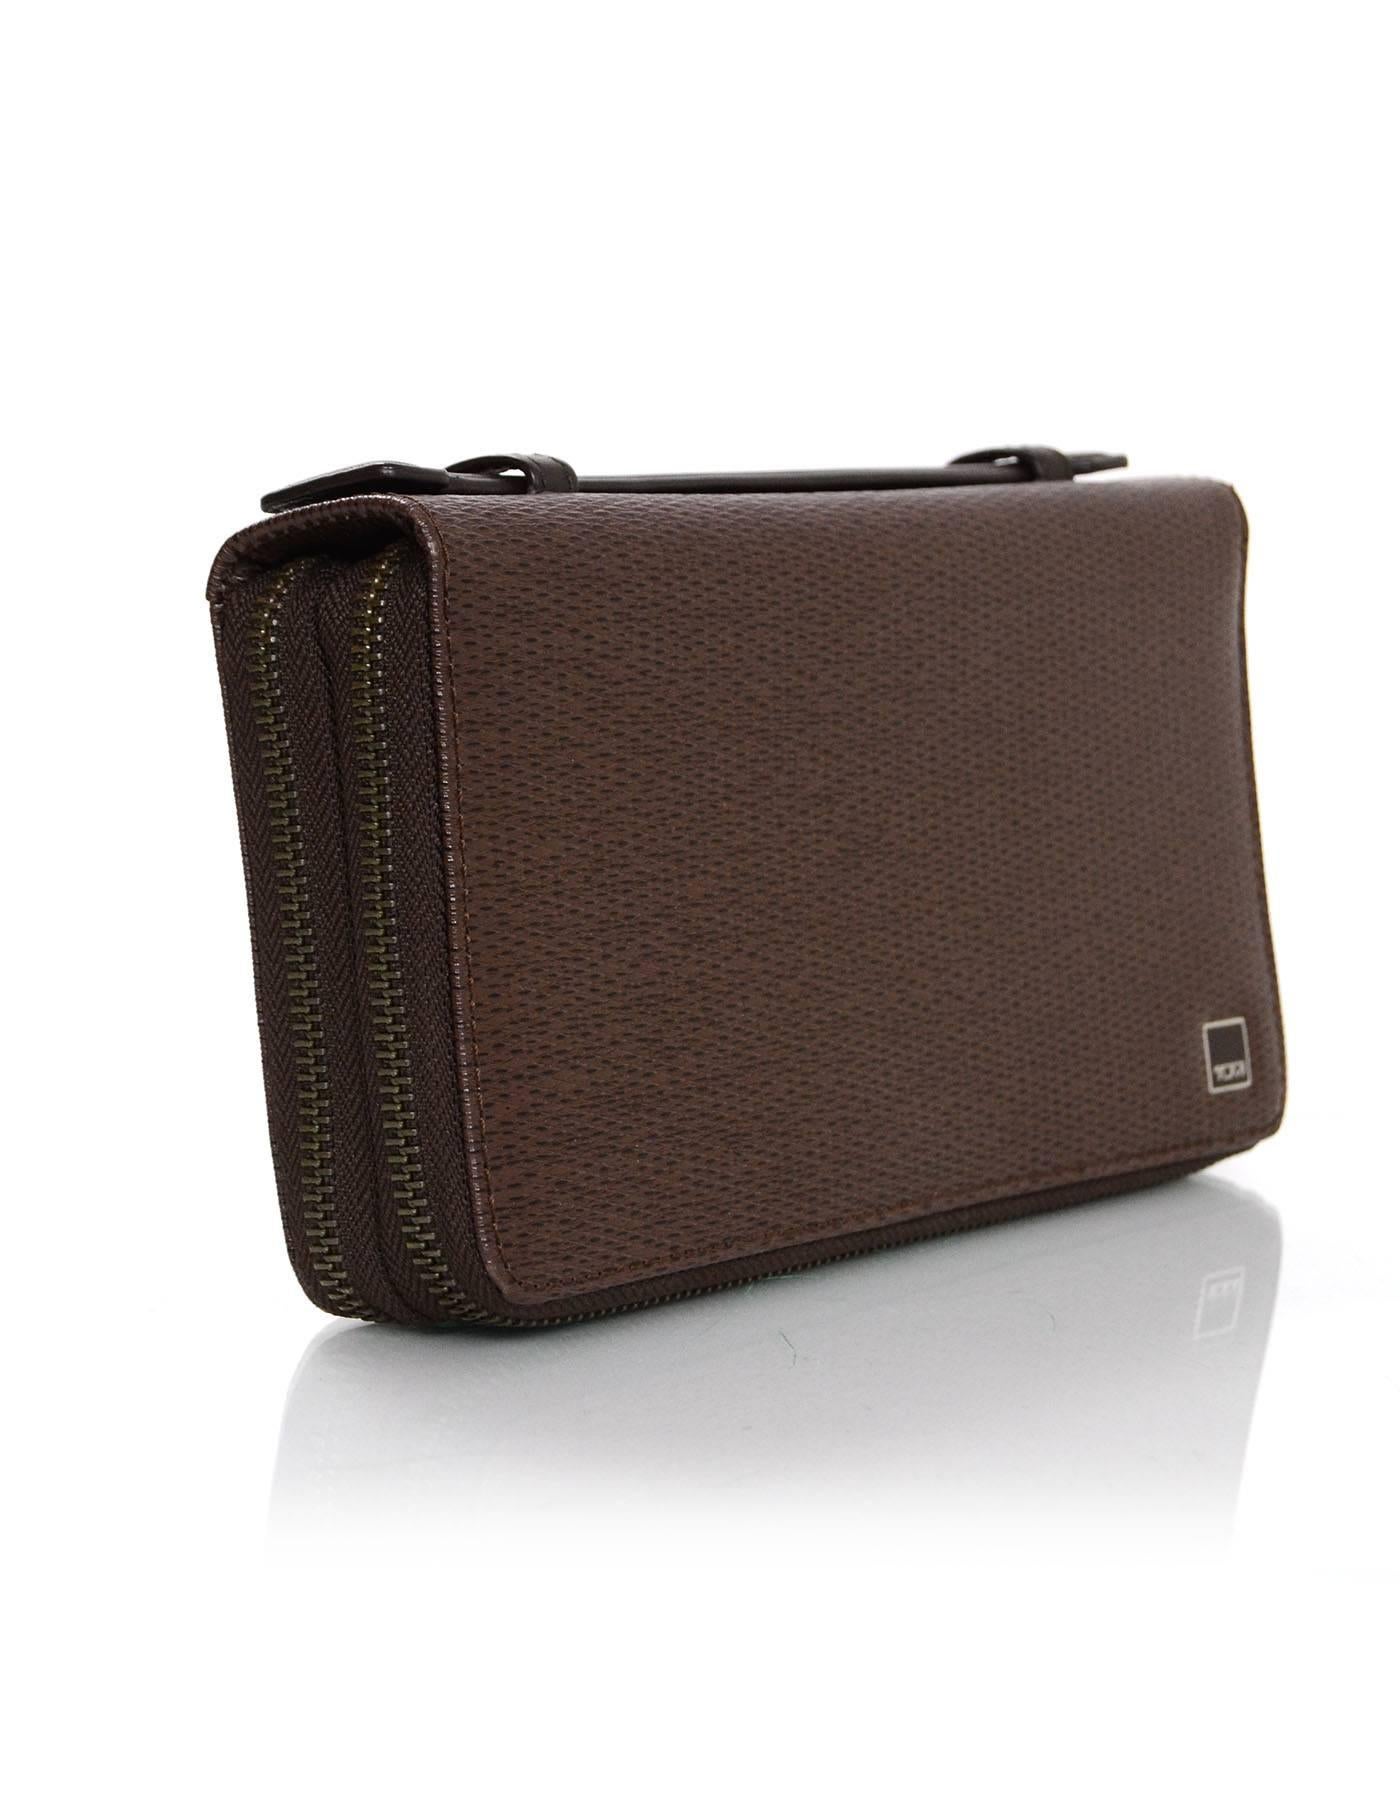 Features multiple compartments for easy access to travel documents and handle at side - Ideal to hold two traveler's belongings

Color: Brown
Hardware: Gunmetal
Materials: Coated canvas, leather, metal
Lining: Brown leather and